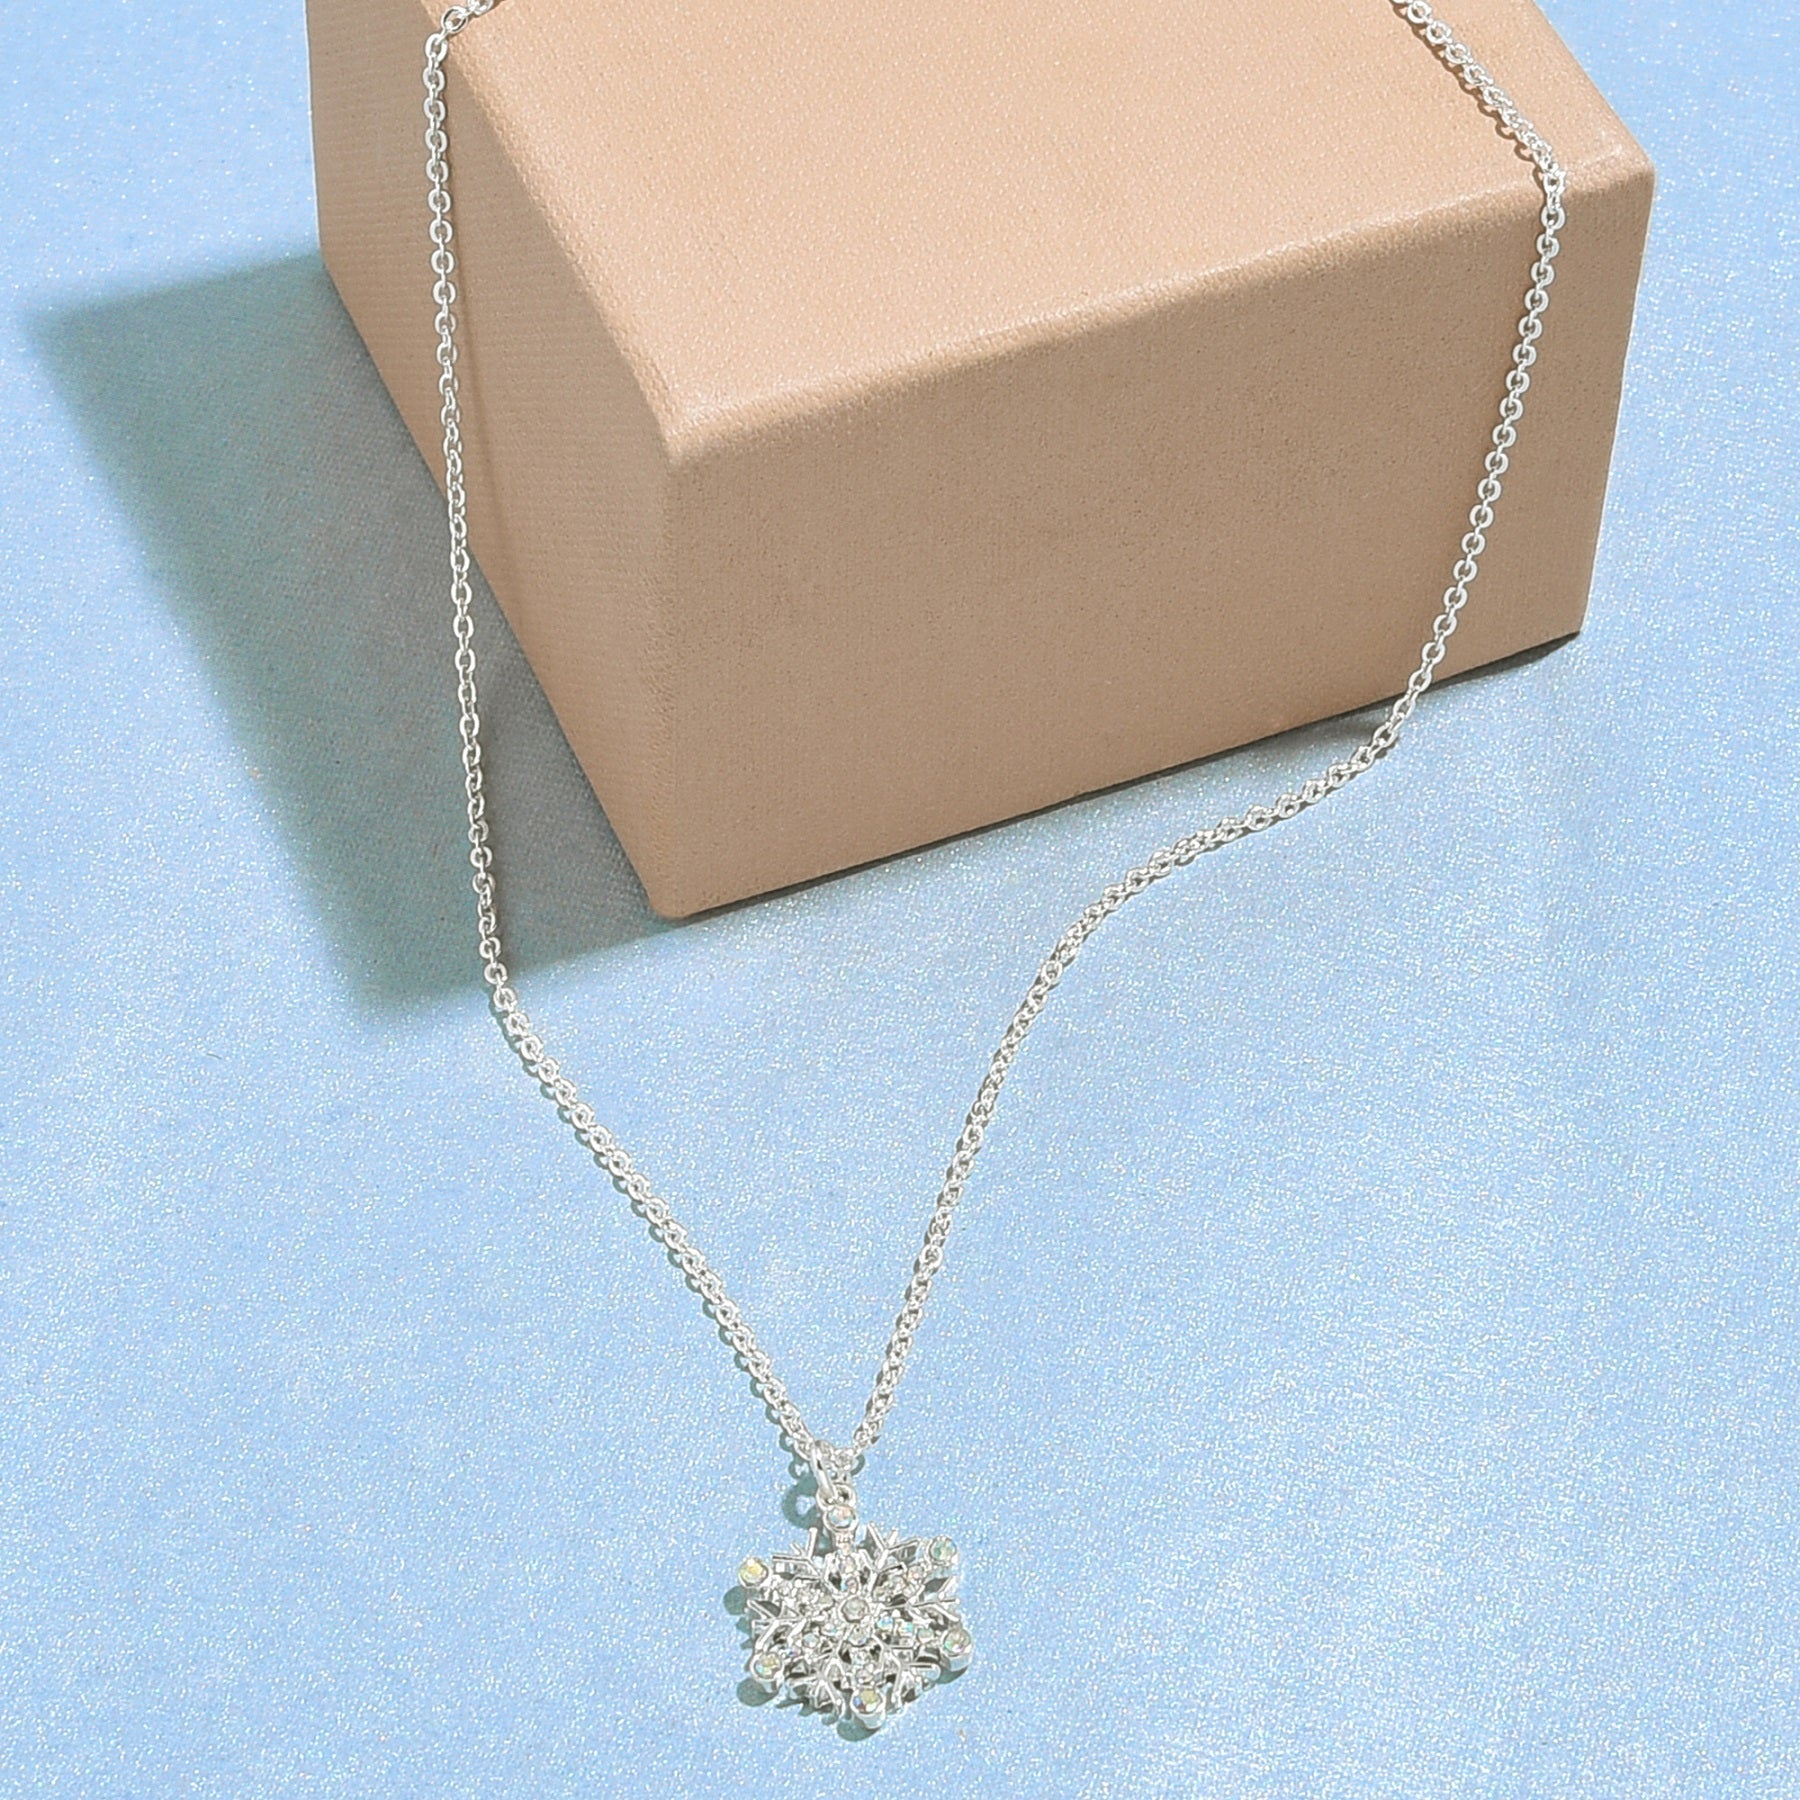 Accessorize London Women's Carded Silver Gifting Sparkle Snowflake Pendant Necklace